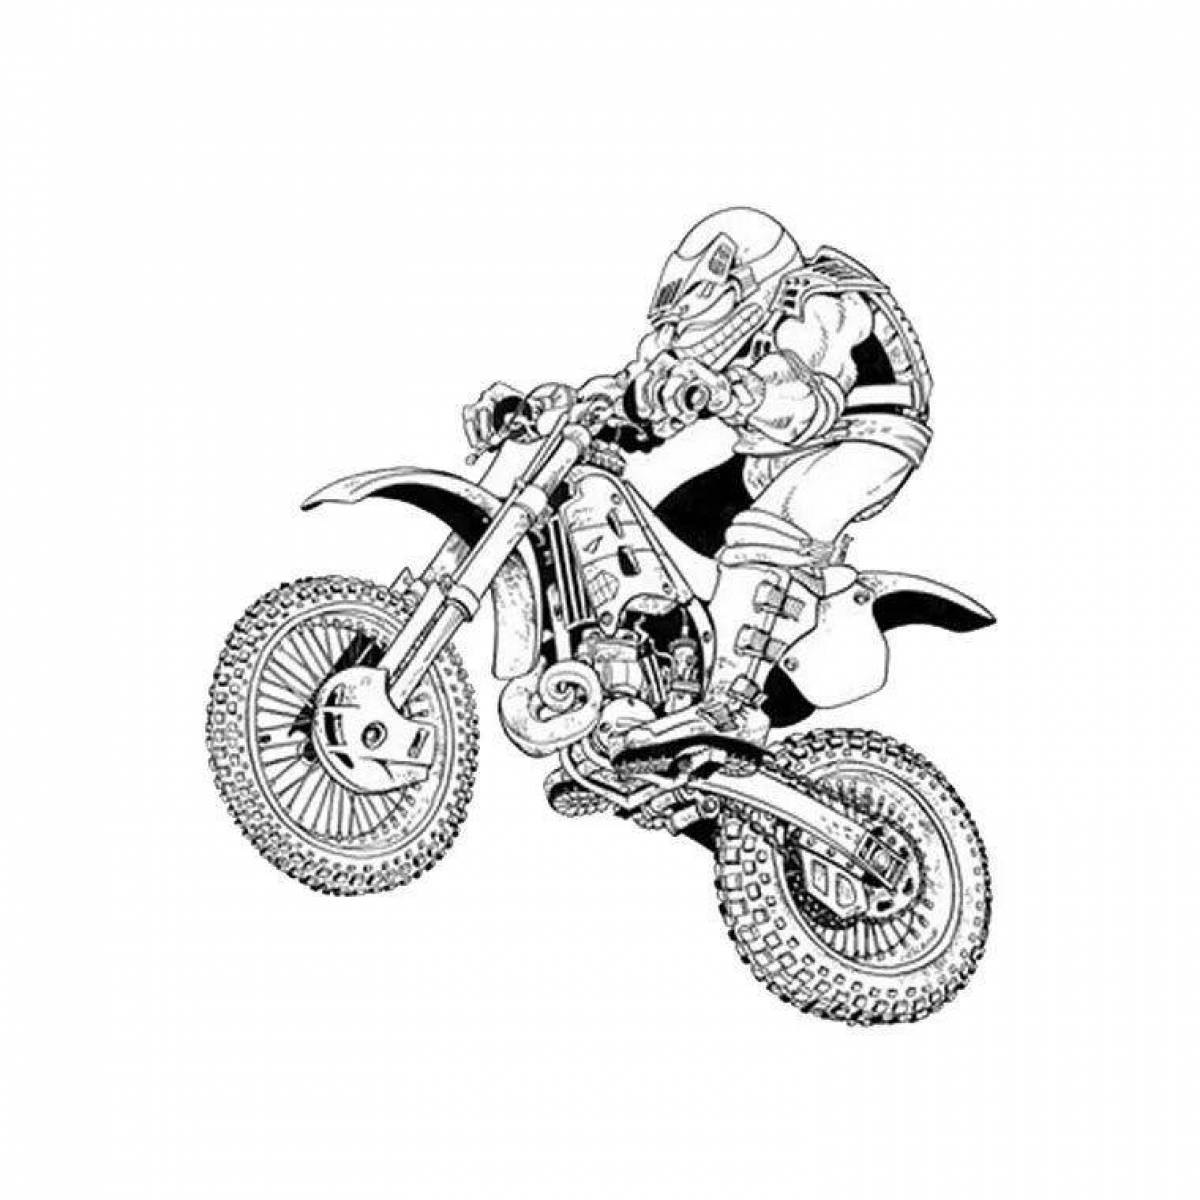 Amazing motocross bikes coloring page